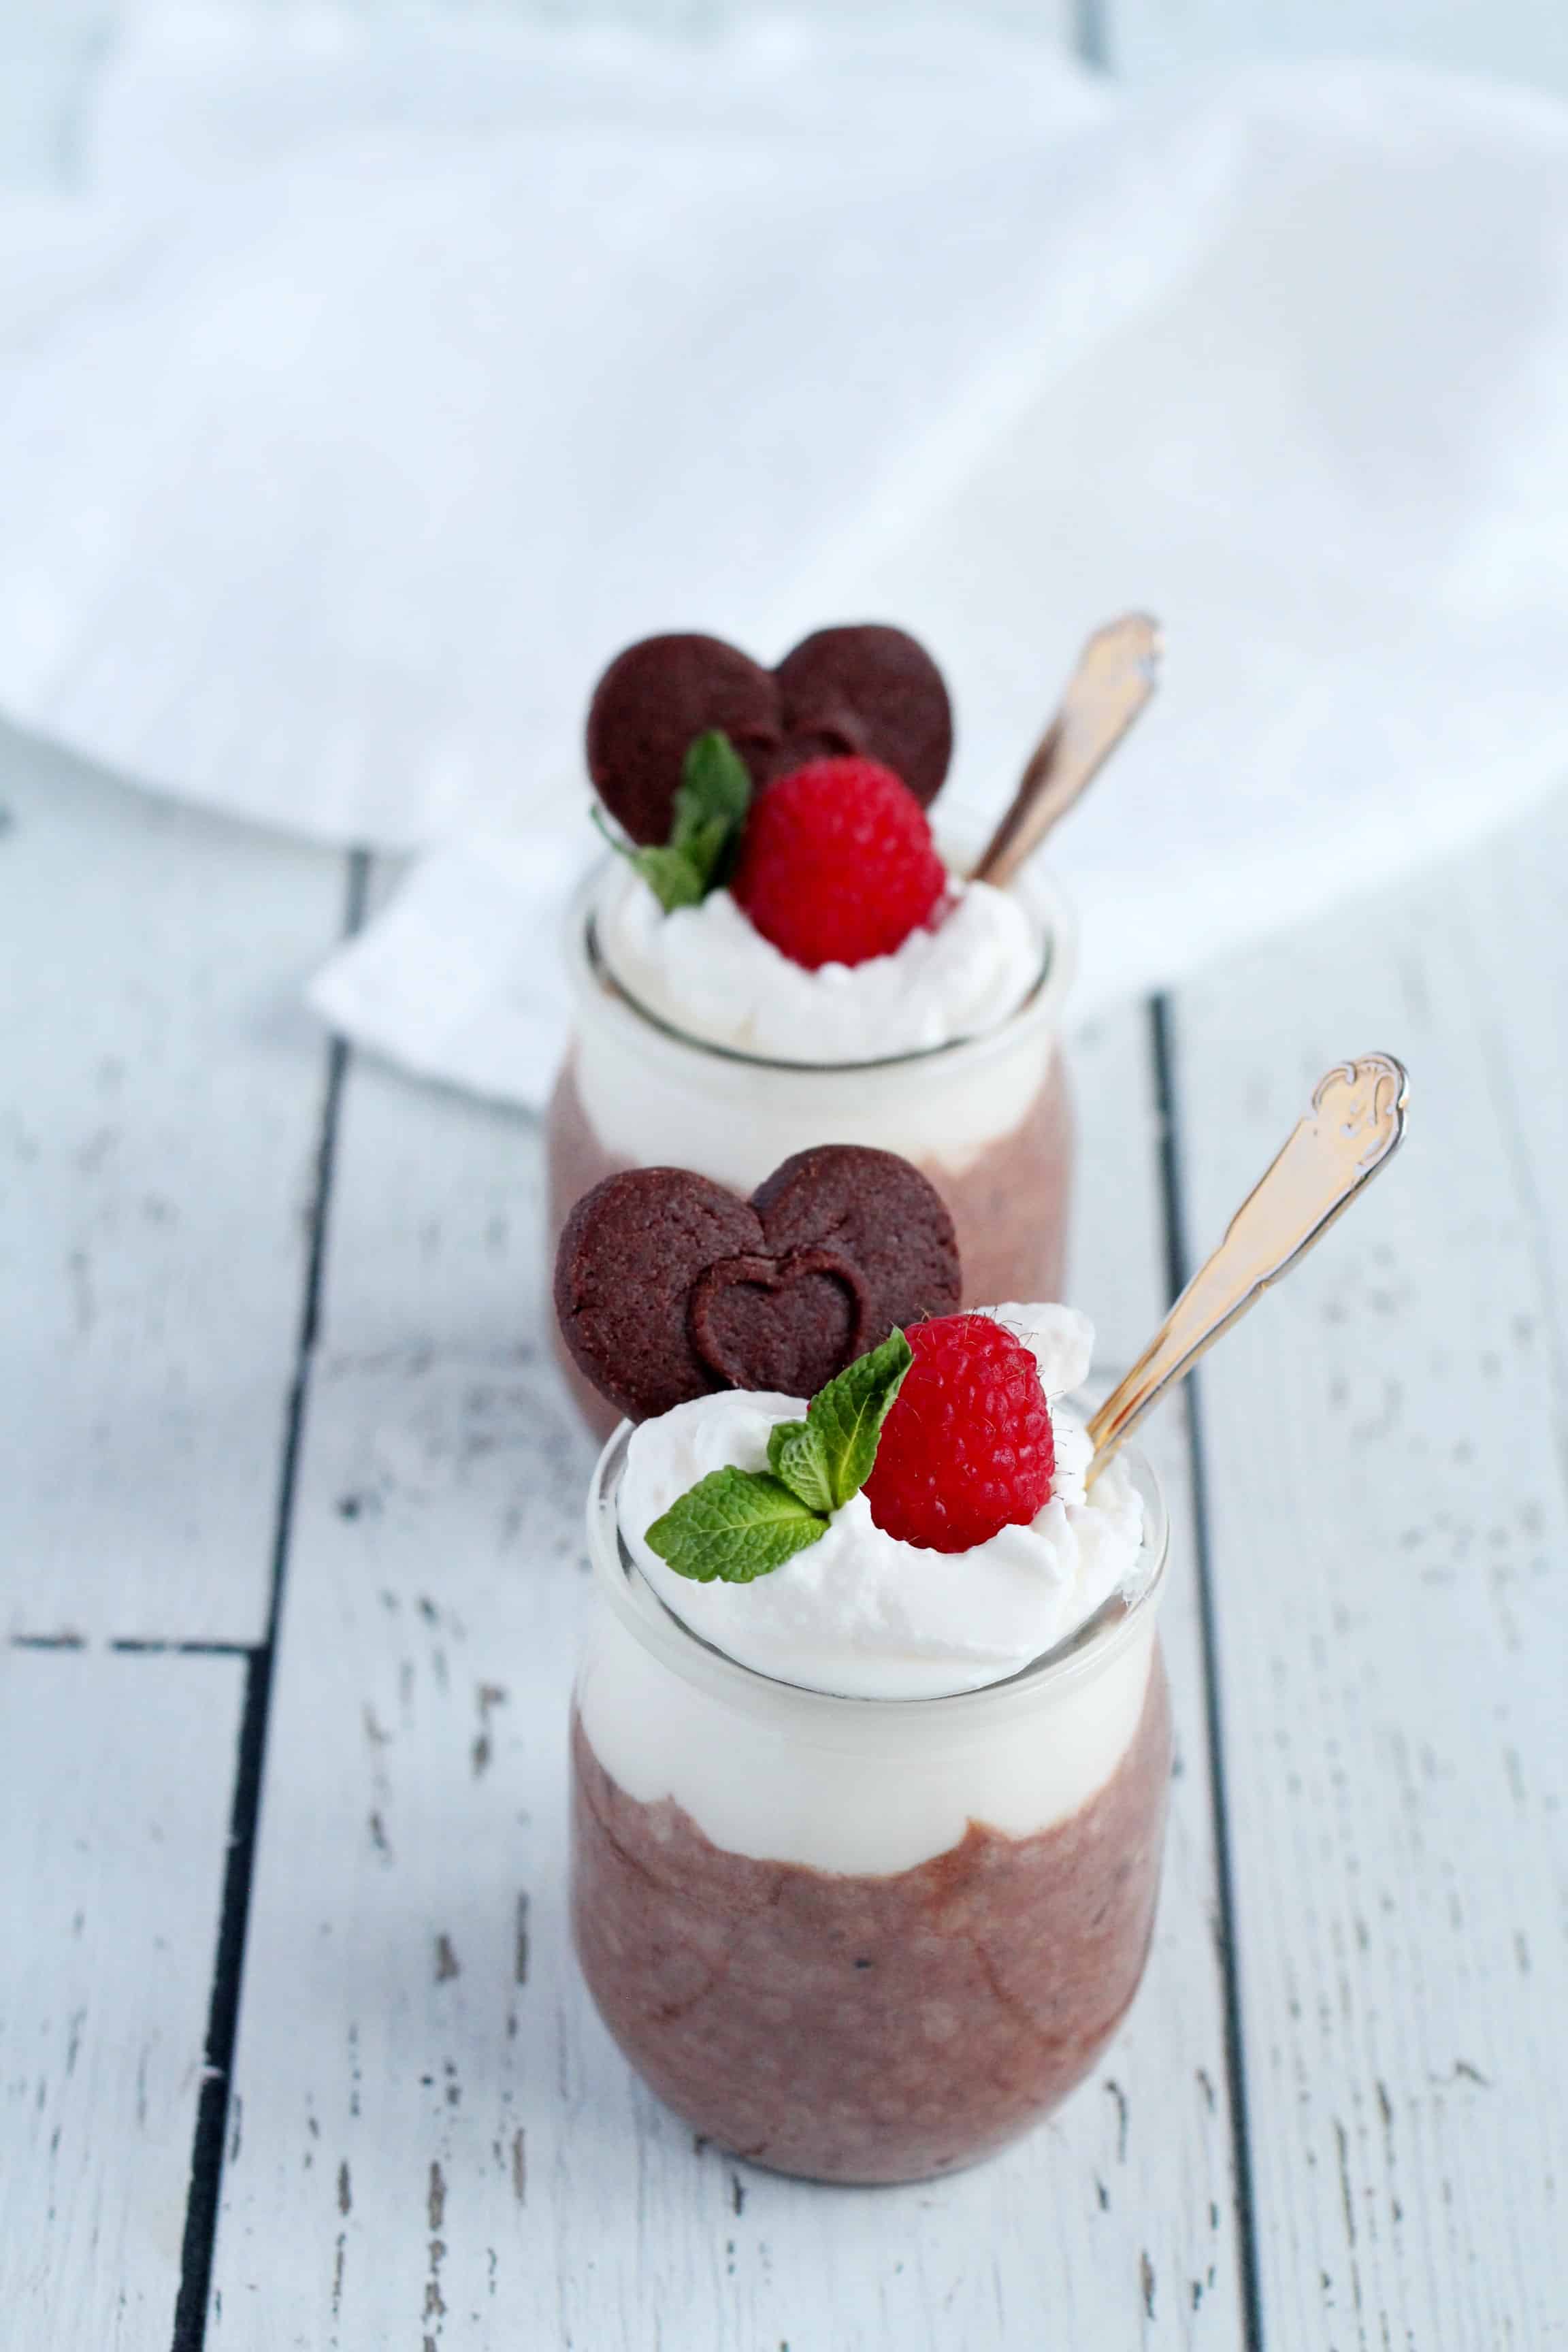 chia pudding with chocolate